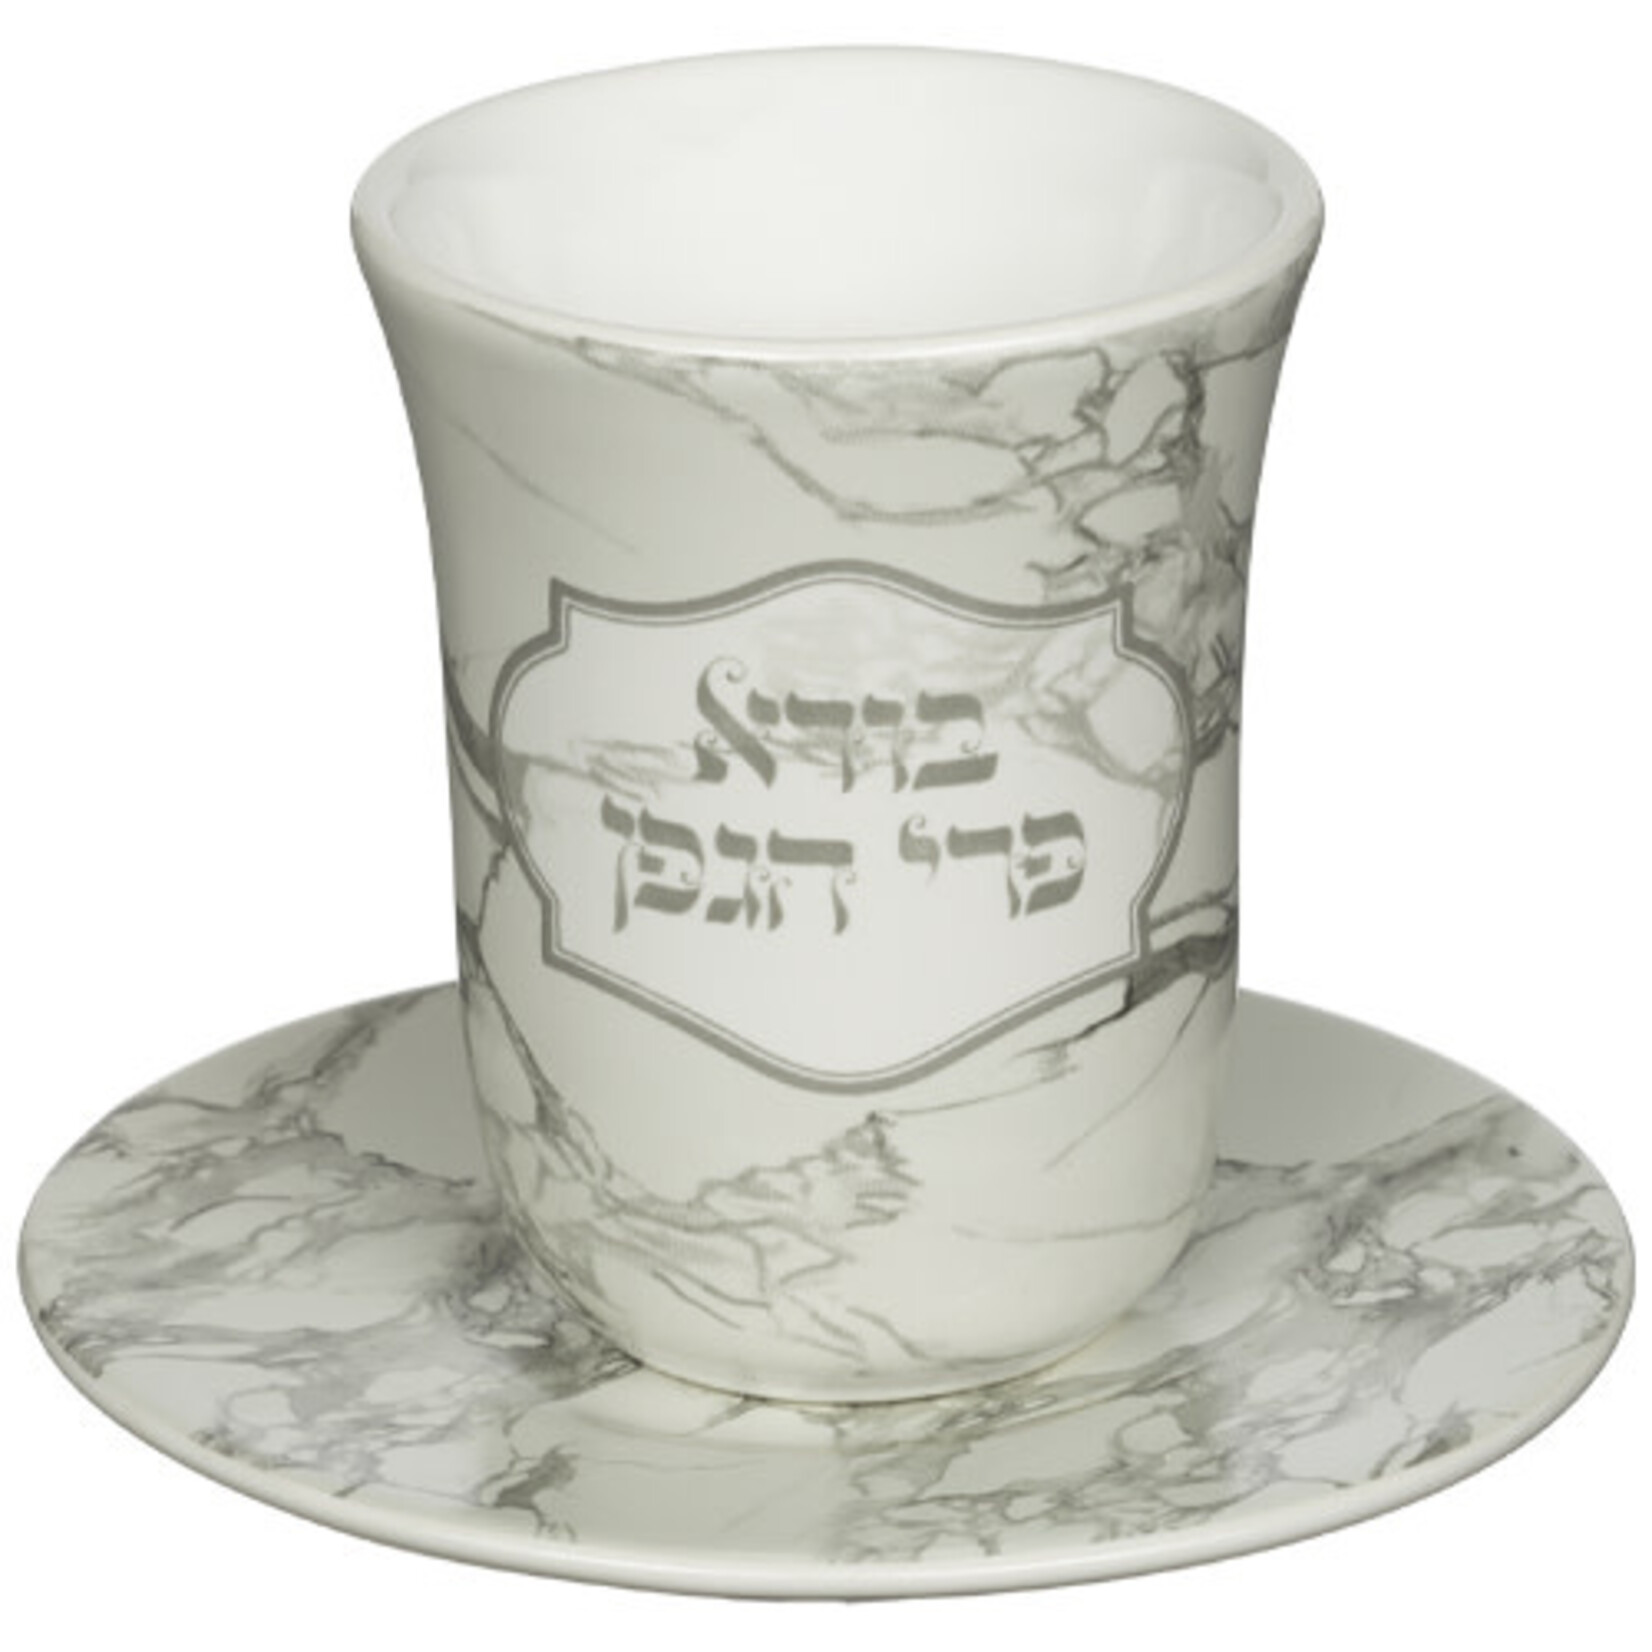 Ceramic Kiddush Cup with Tray, Marble Effect